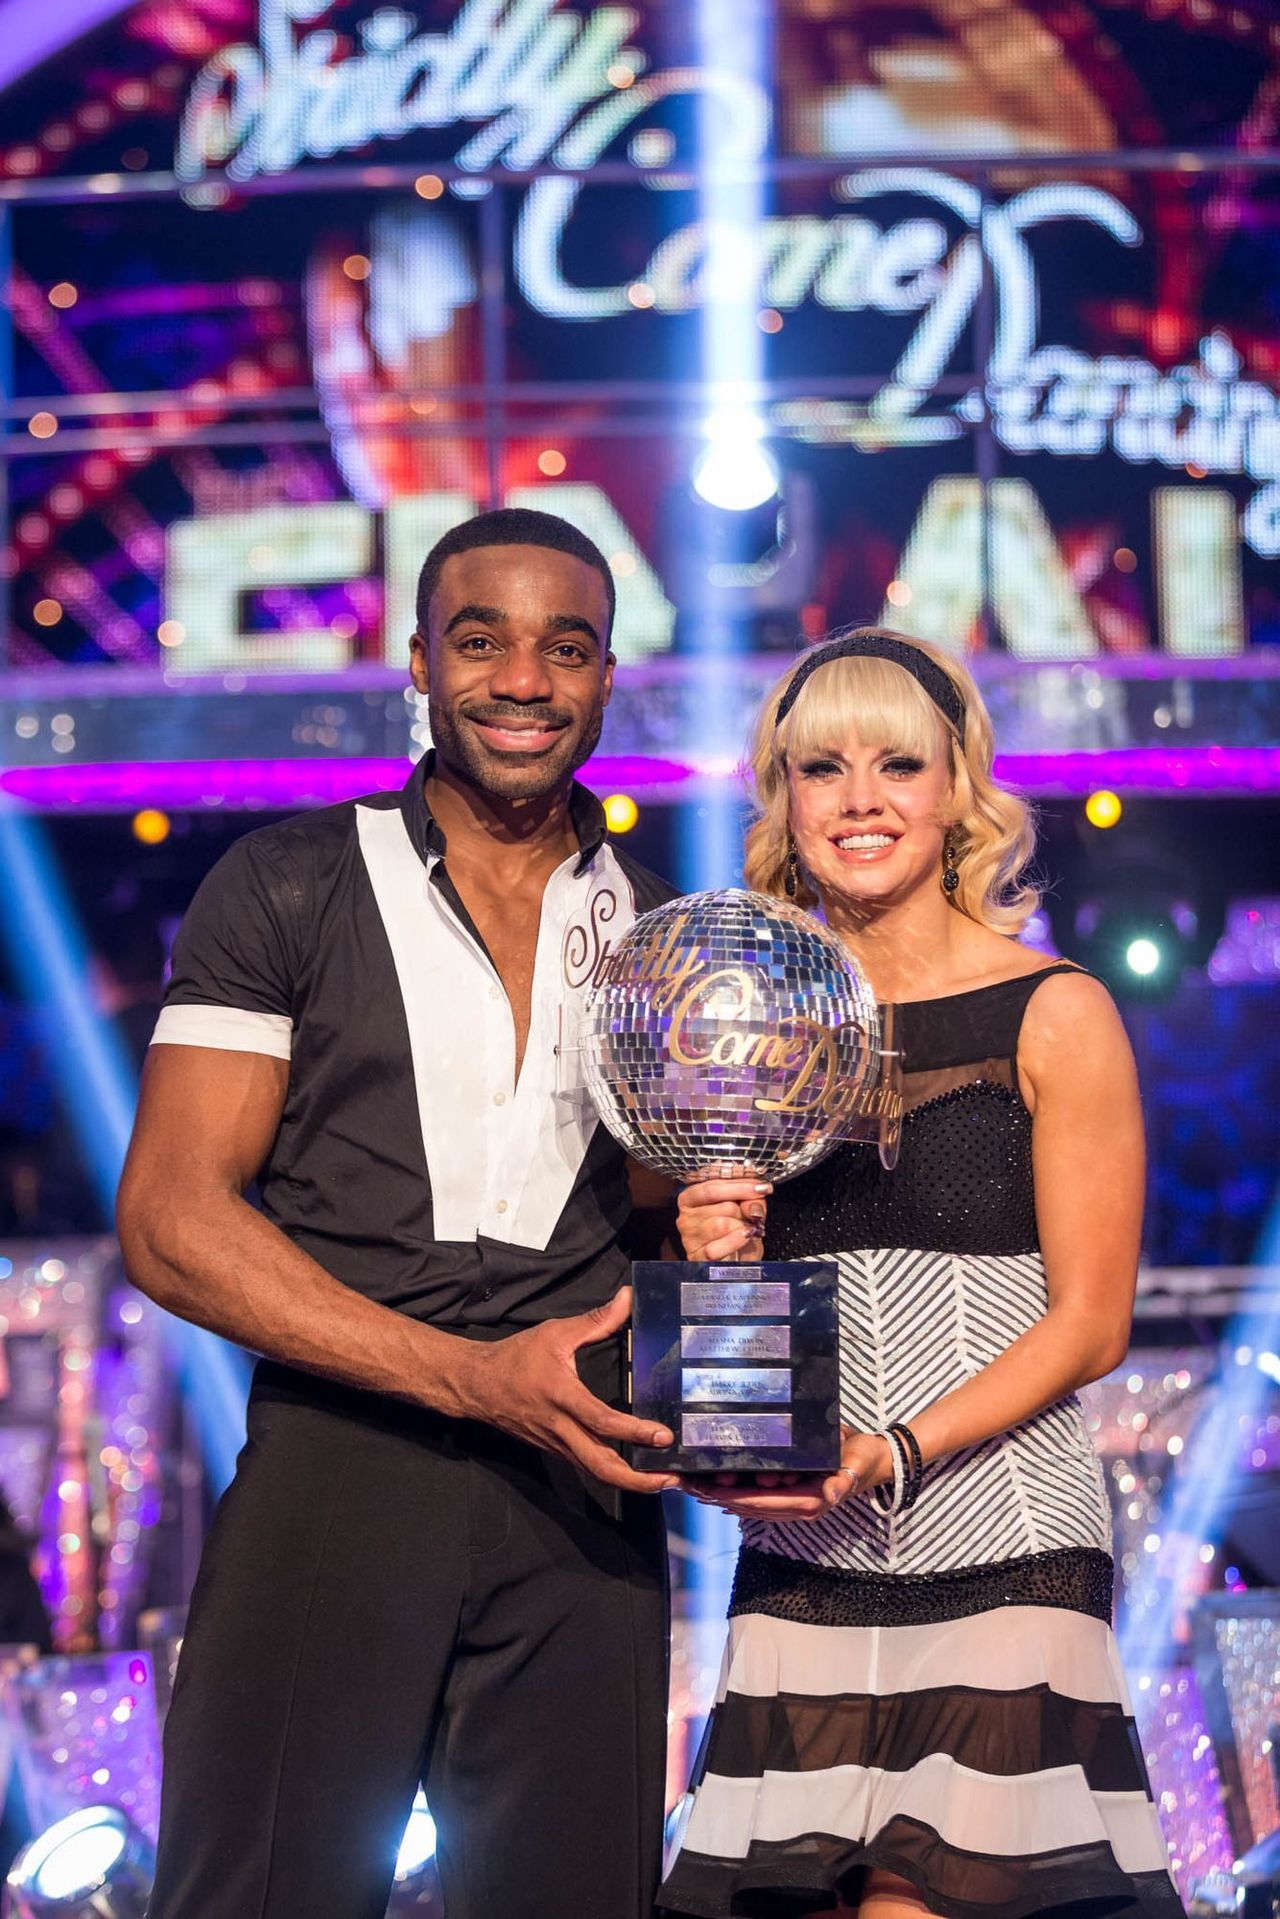 Ore Oduba and Joanne Clifton lifted the Glitterball Trophy in 2016